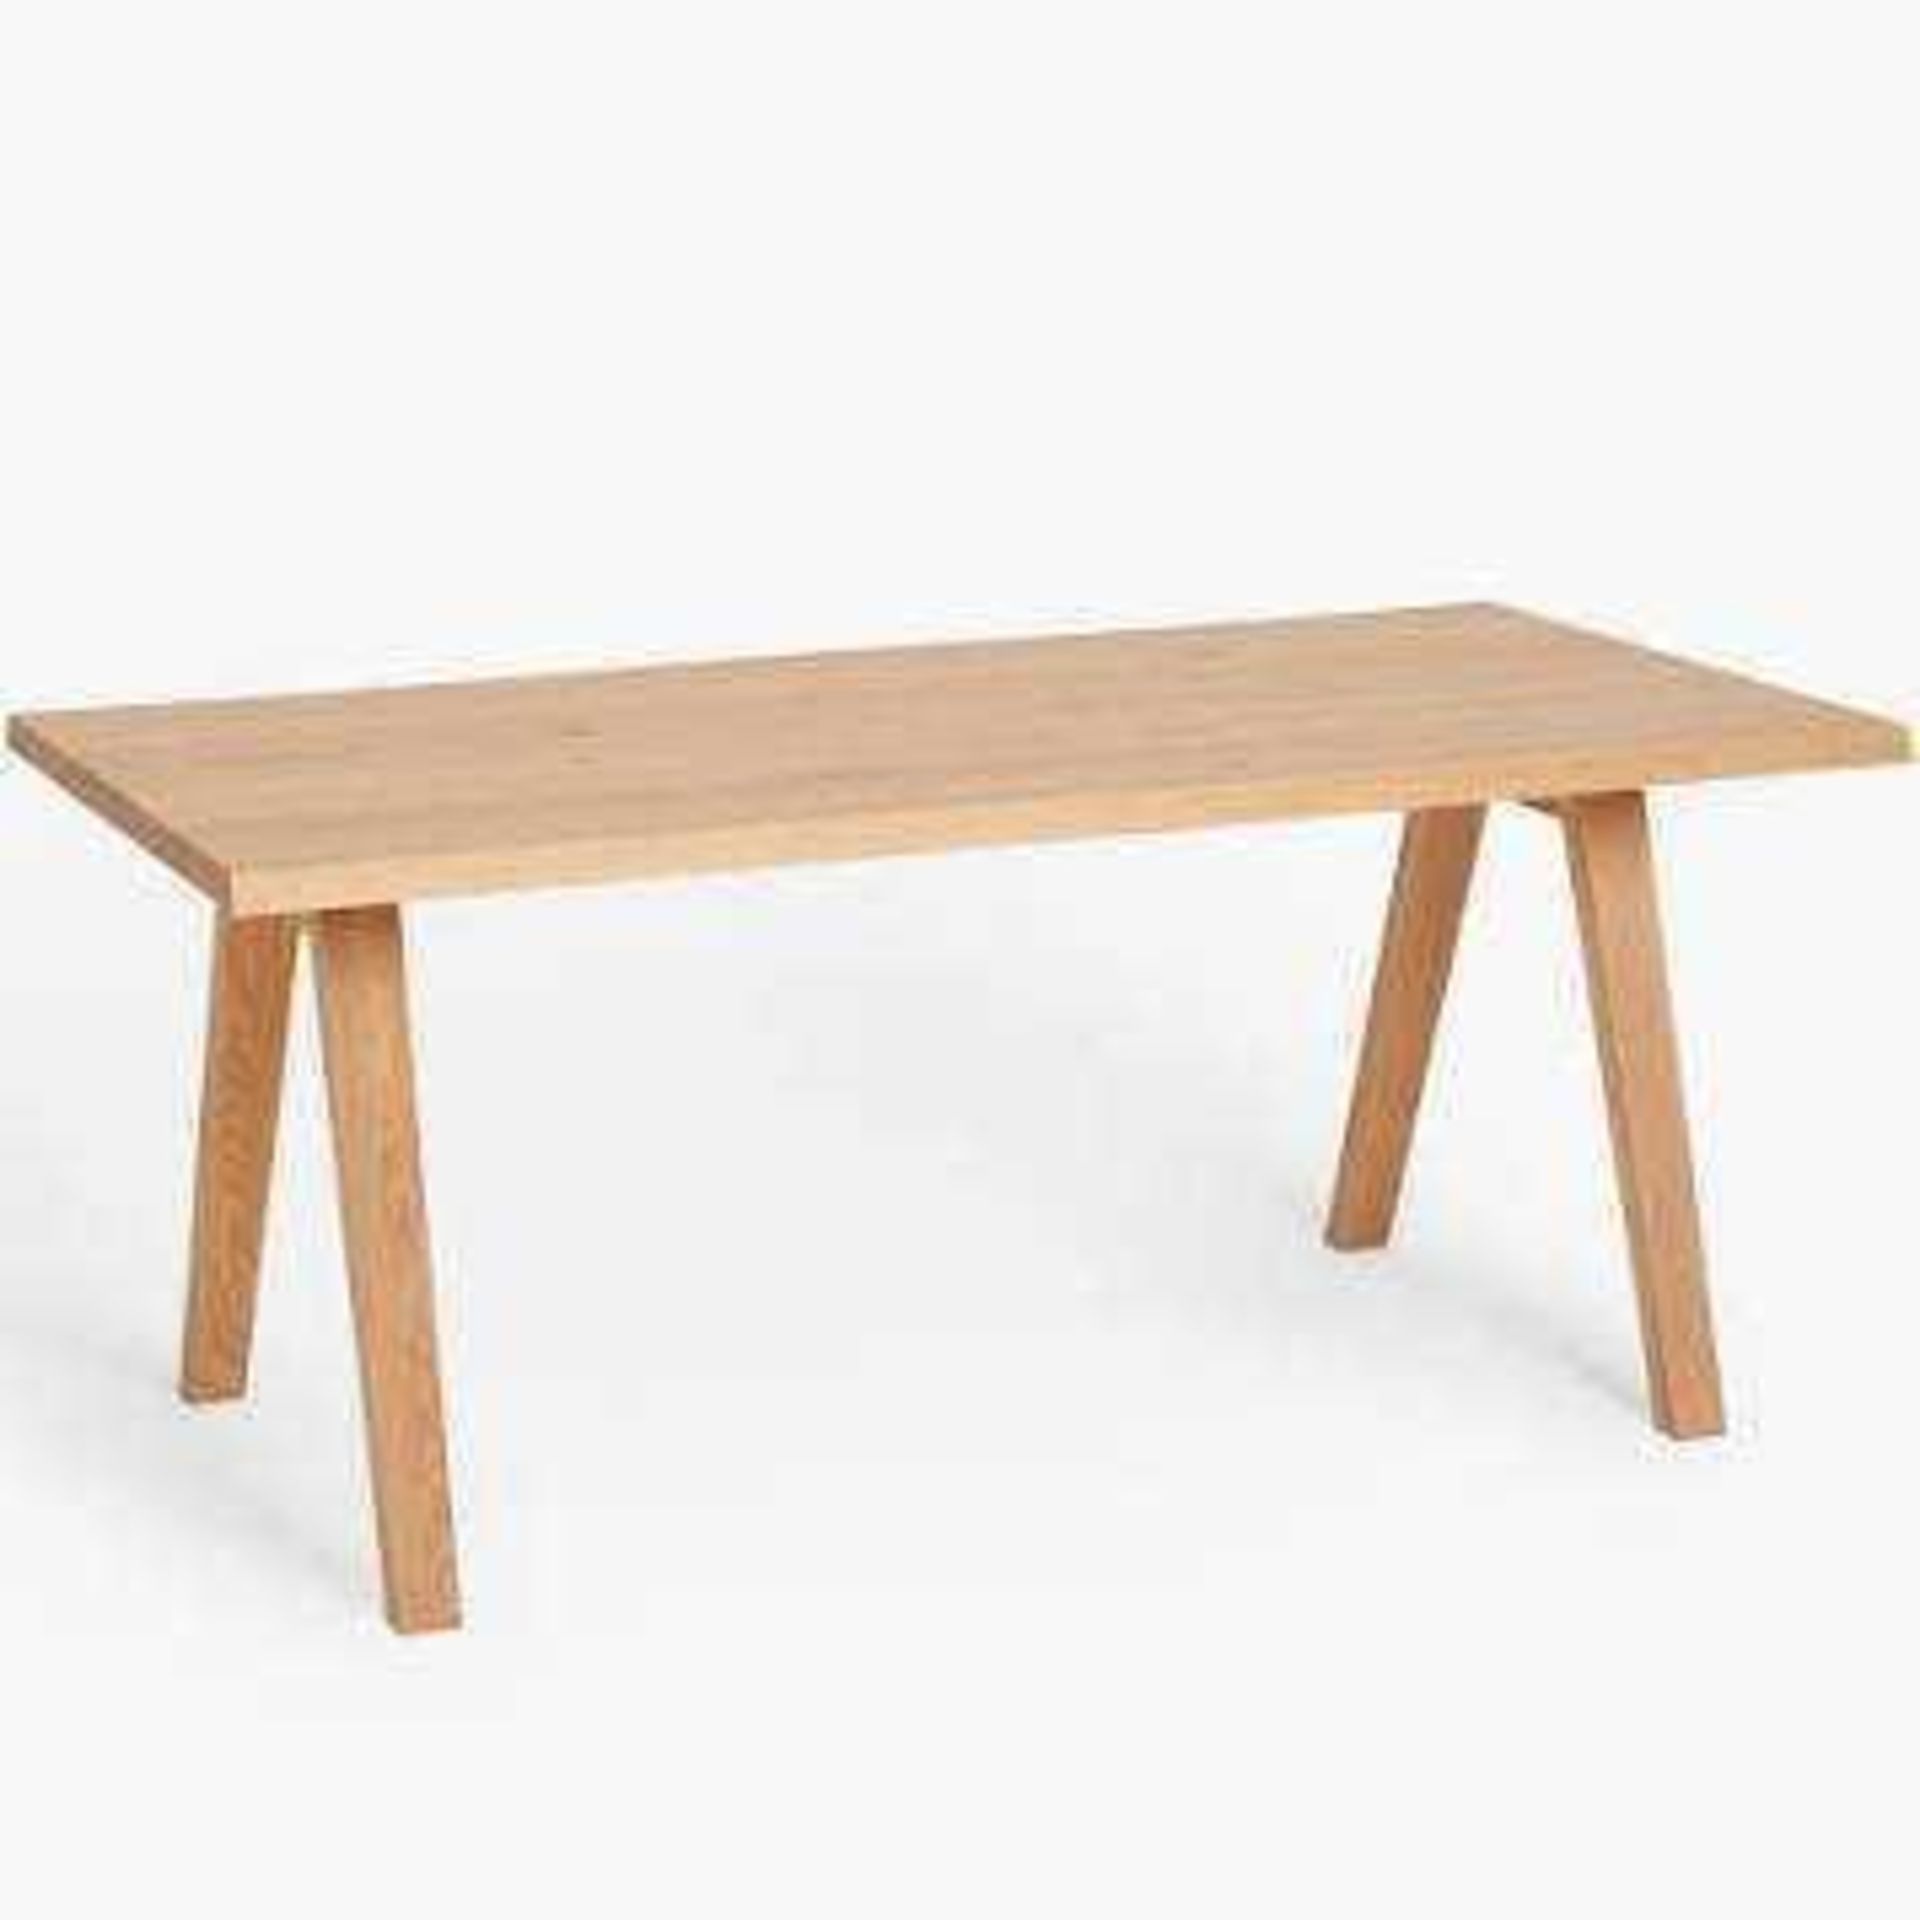 Rrp £1500 John Lewis & Partners Lorn 6-10 Seater Extending Dining Table Top Only ! (Top Only!) Part